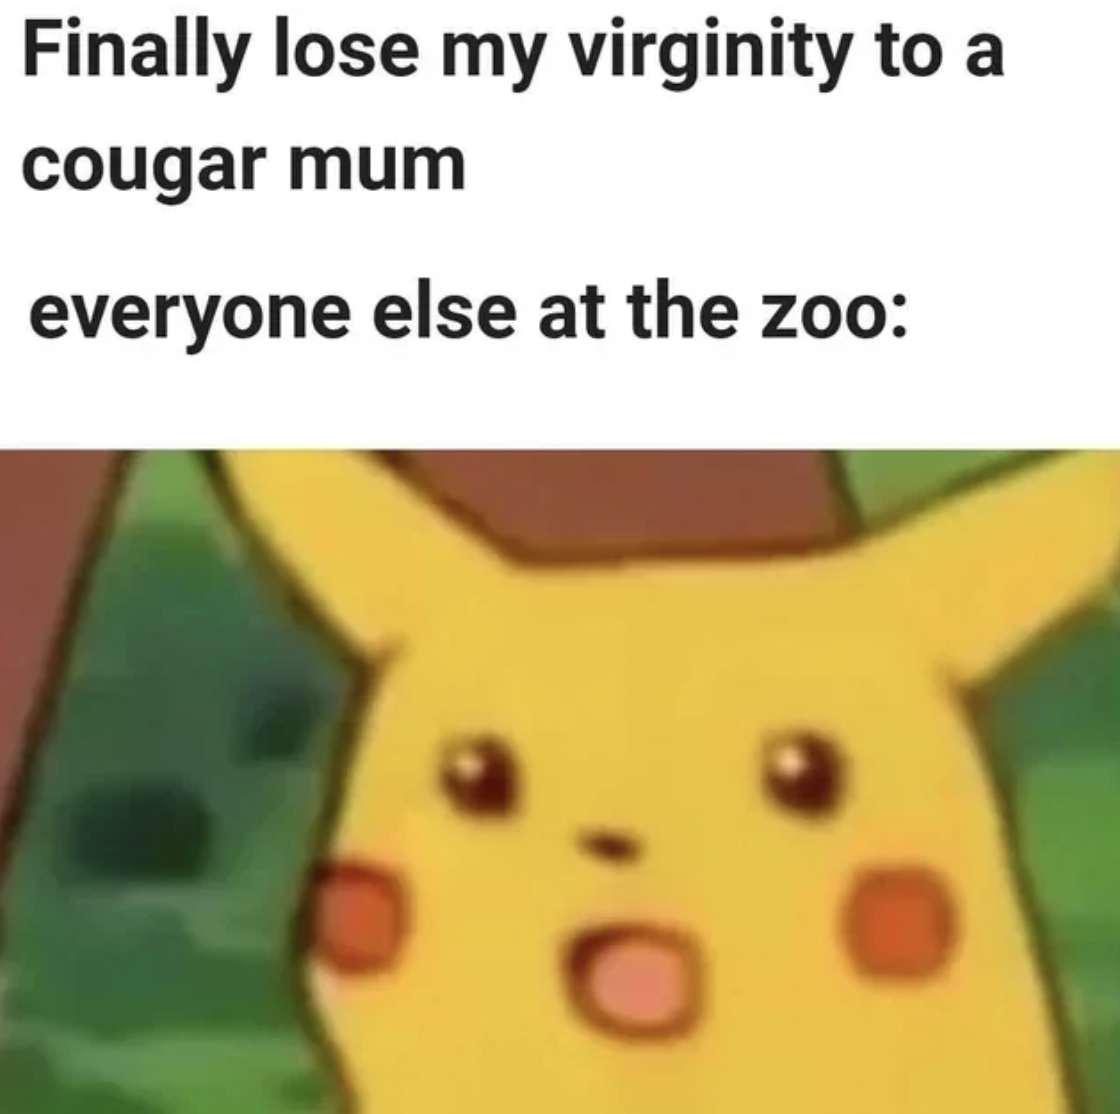 best surprise pikachu memes - Finally lose my virginity to a cougar mum everyone else at the zoo